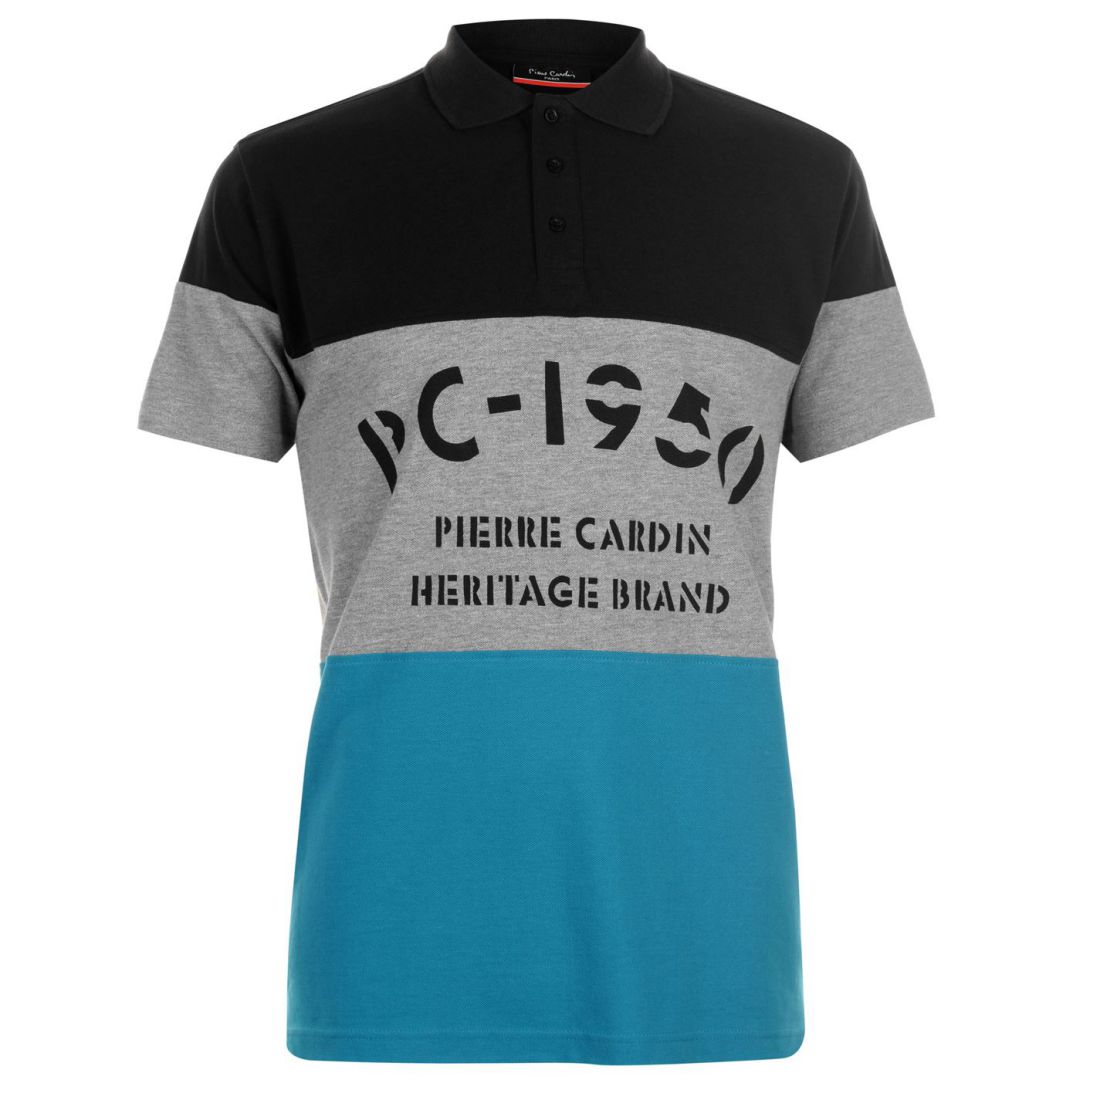 Pierre Cardin Mens Panel Polo Shirt Classic Fit Tee Top Short Sleeve ...